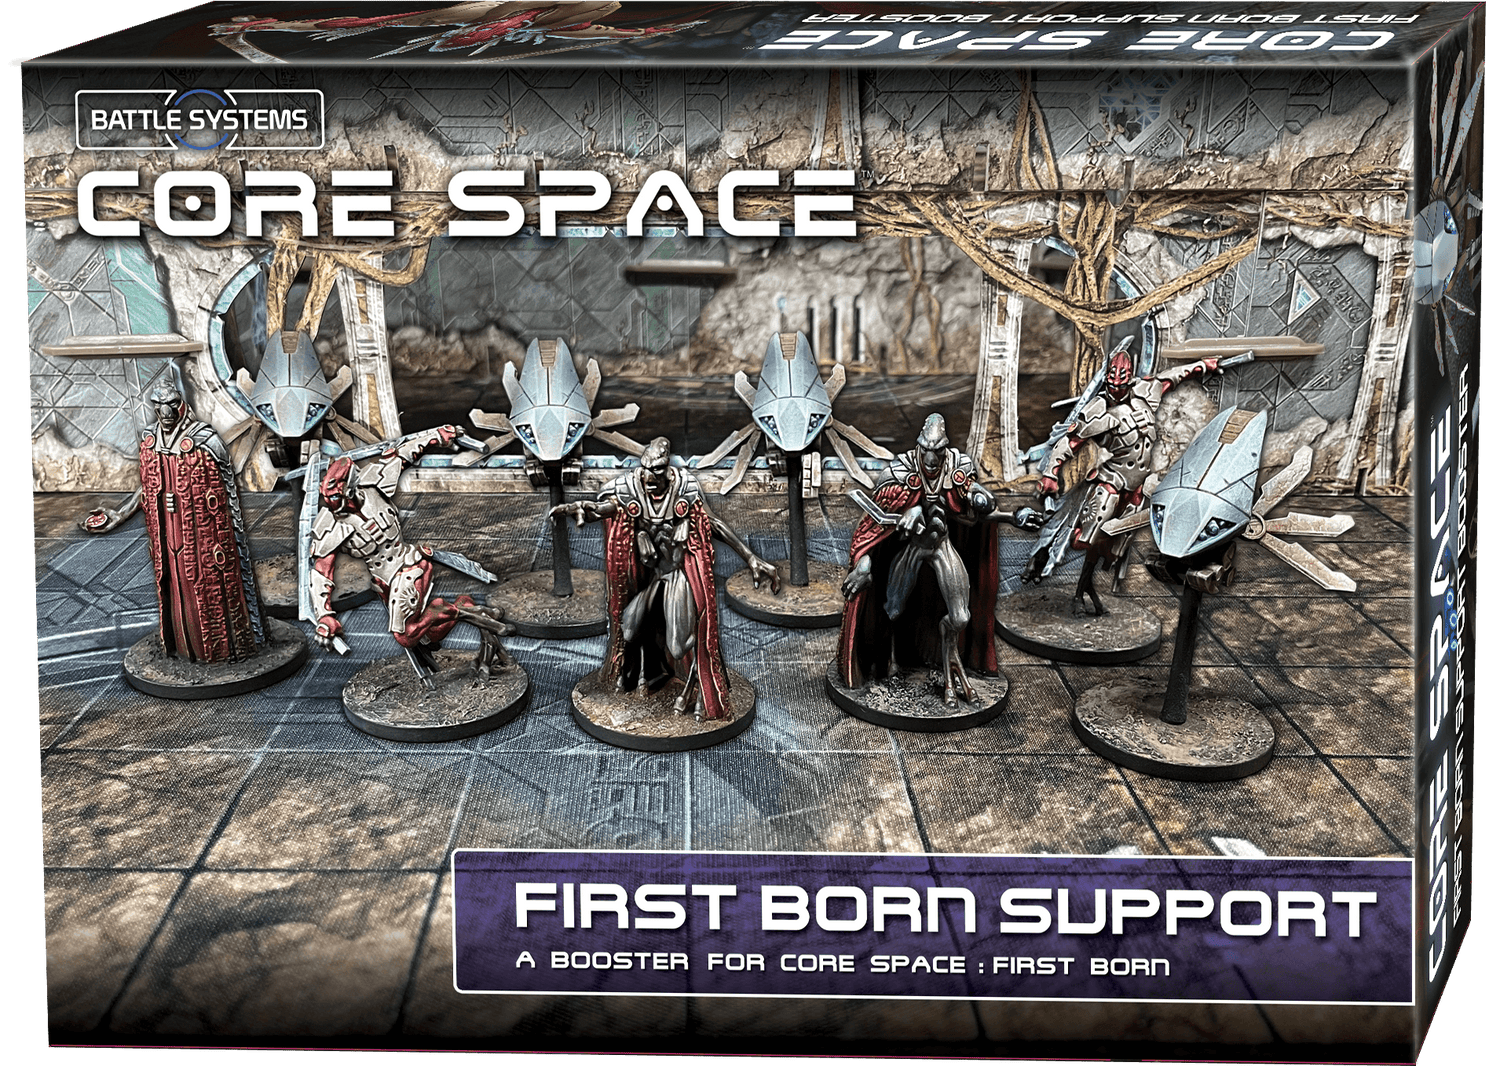 Battle Systems: CORE SPACE FIRST BORN SUPPORT